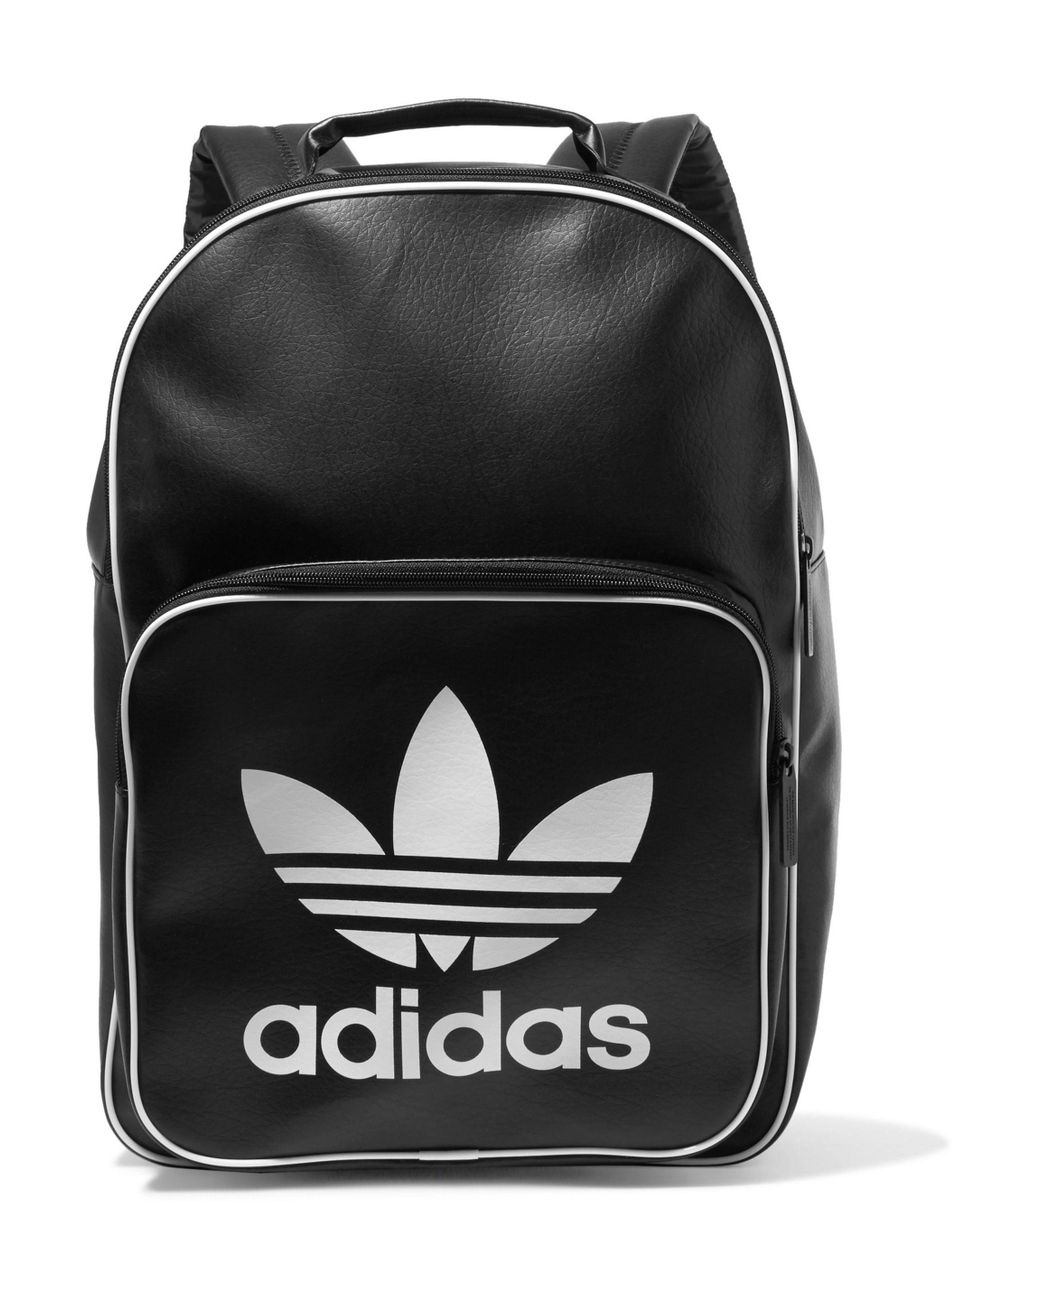 adidas Originals Faux Leather Backpack in Black | Lyst UK